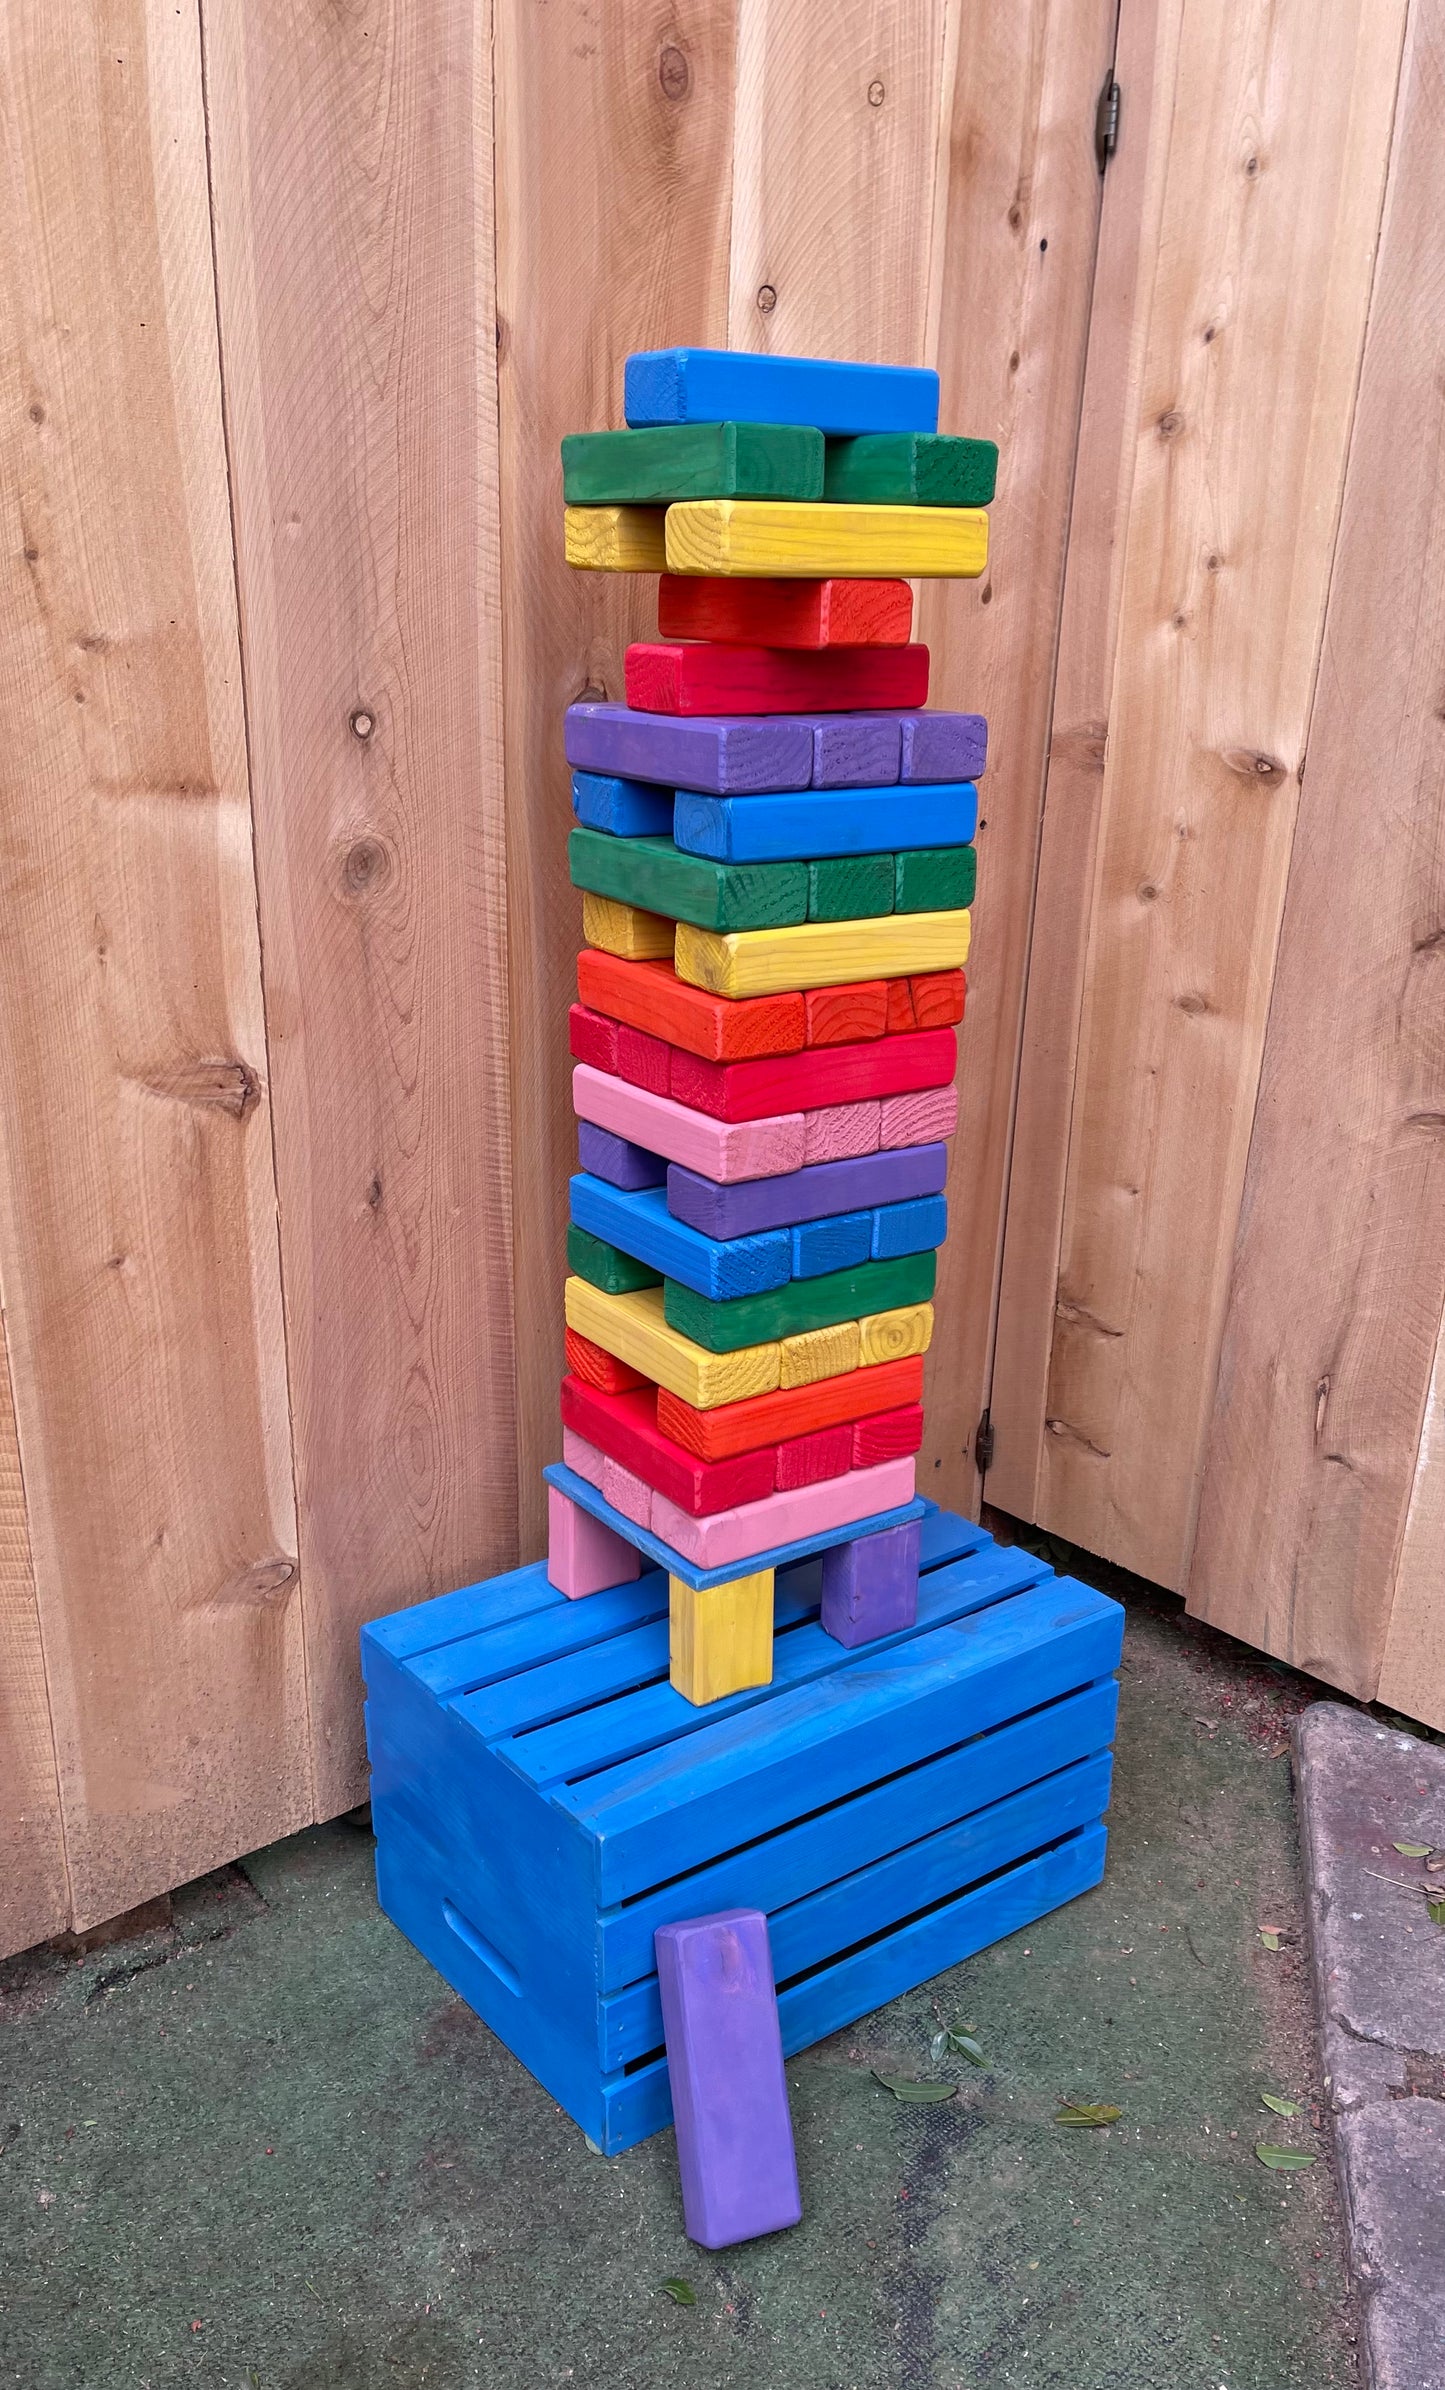 GIANT Tumble Tower GAME COLORFUL Rainbow + CRATE & STAND